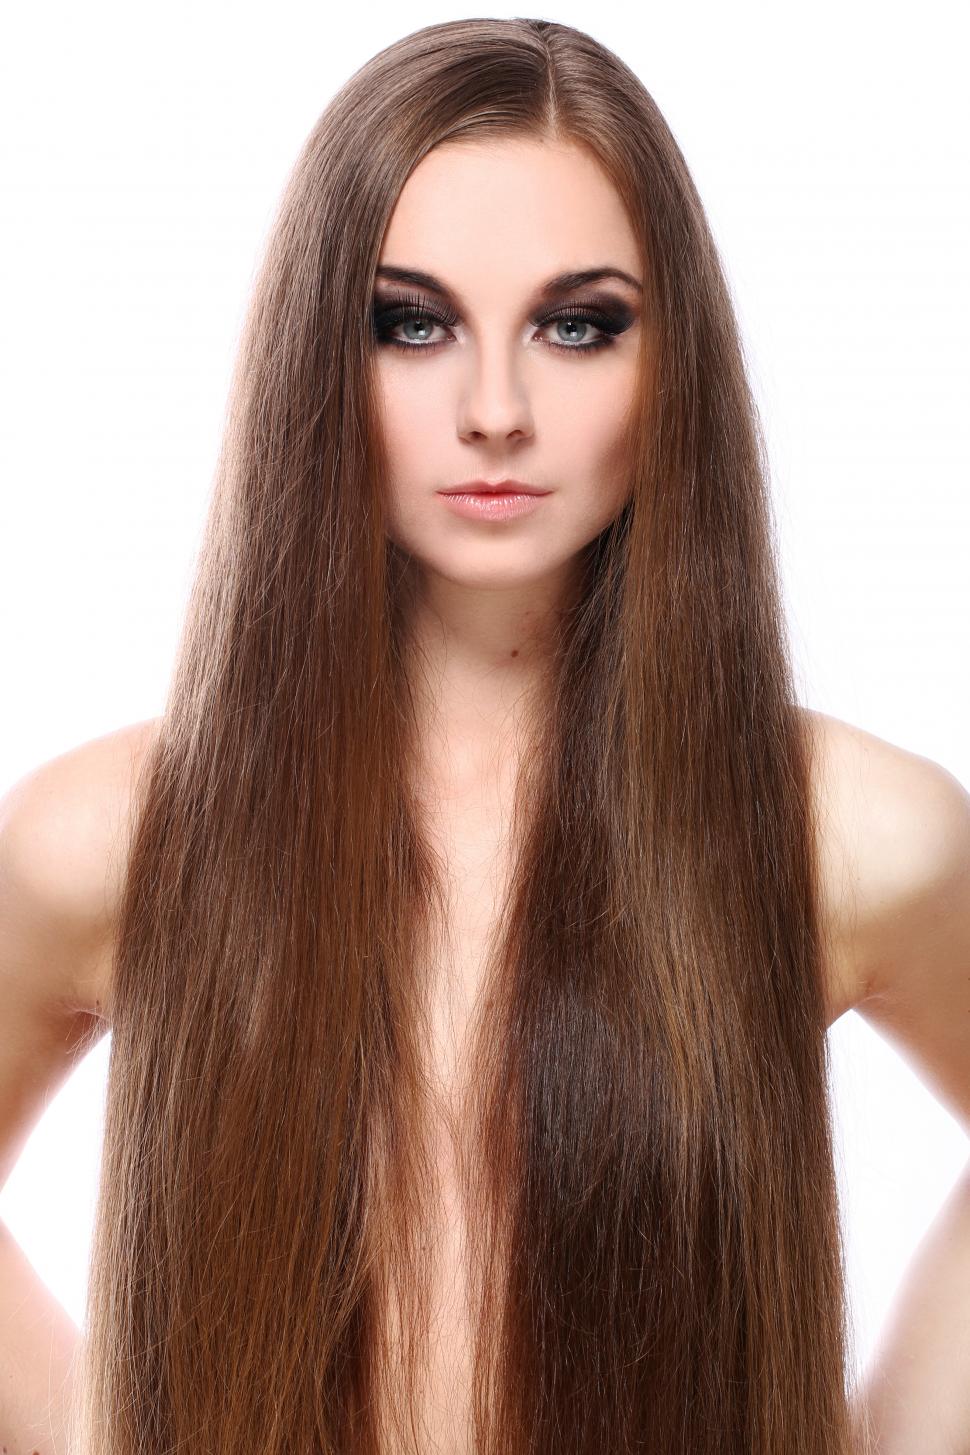 How to Achieve Salon-Quality Keratin Treatment at Home